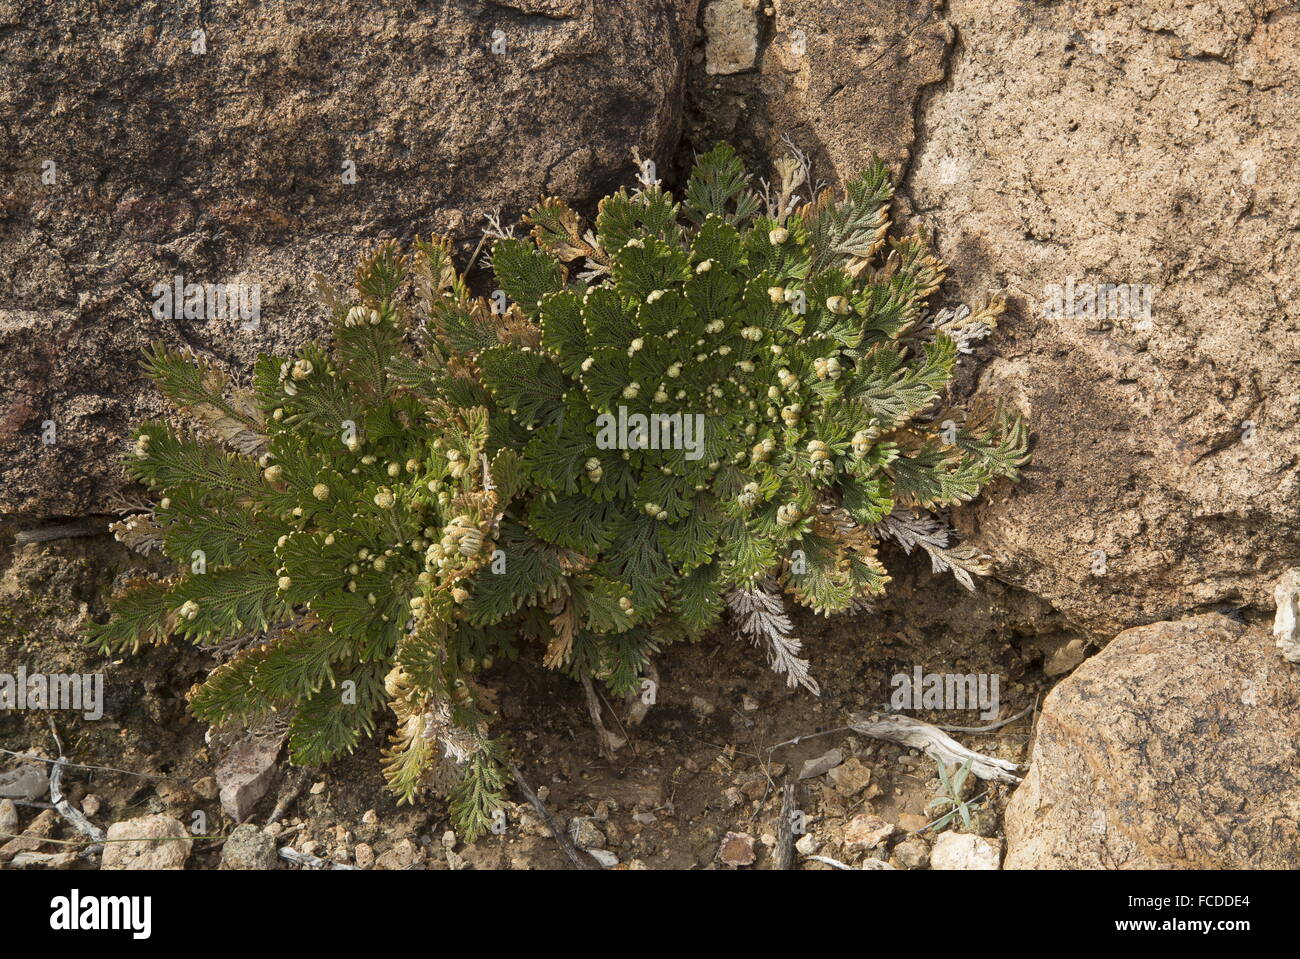 Resurrection fern, Selaginella lepidophylla, - a desert fern or spikemoss, able to revive when wetted. Big Bend, Texas. Stock Photo